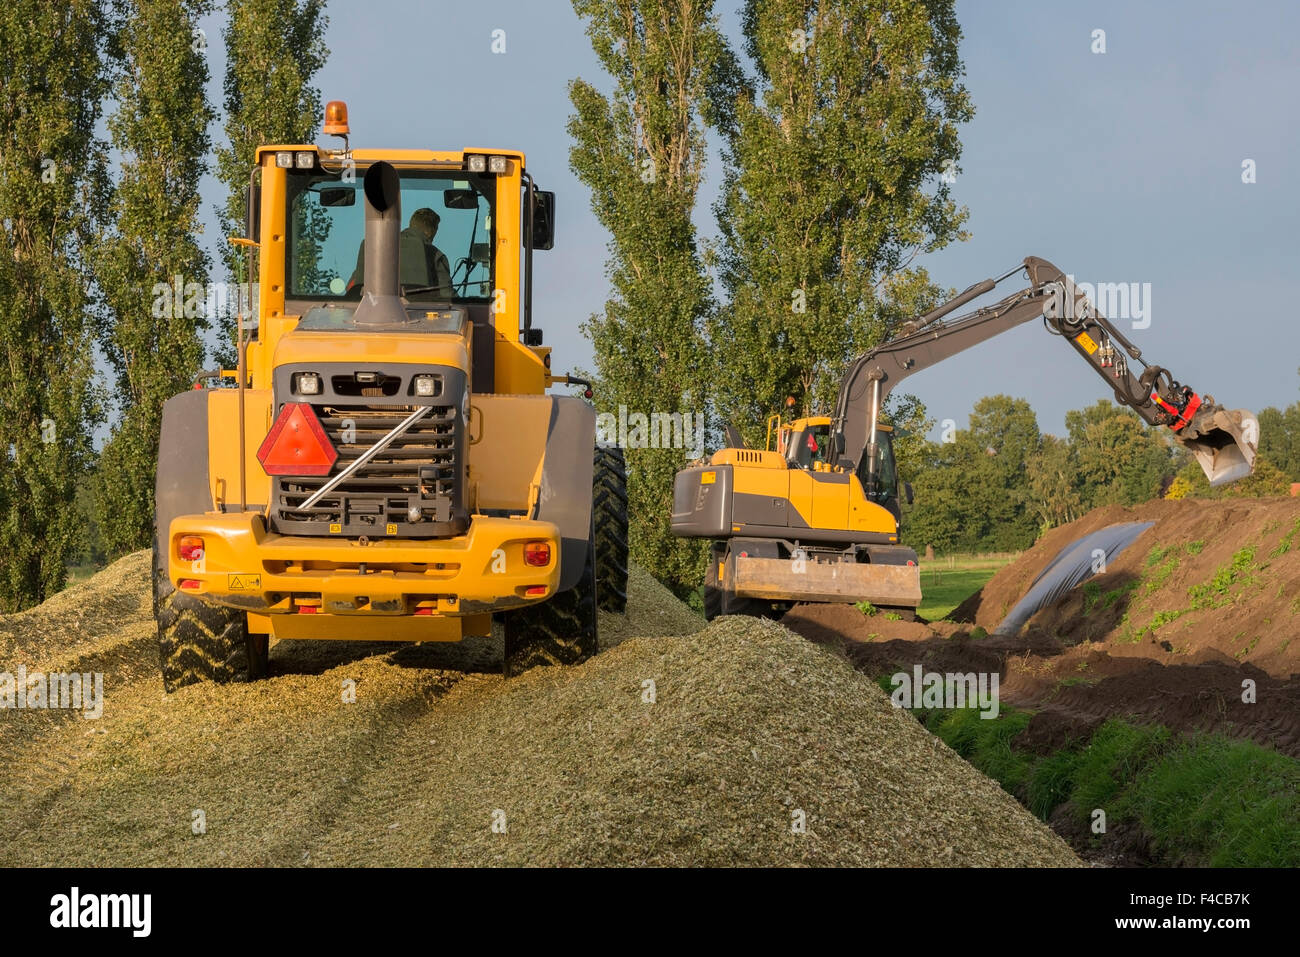 Agriculture shredded corn silage with a yellow shovel and excavator in the Netherlands Stock Photo